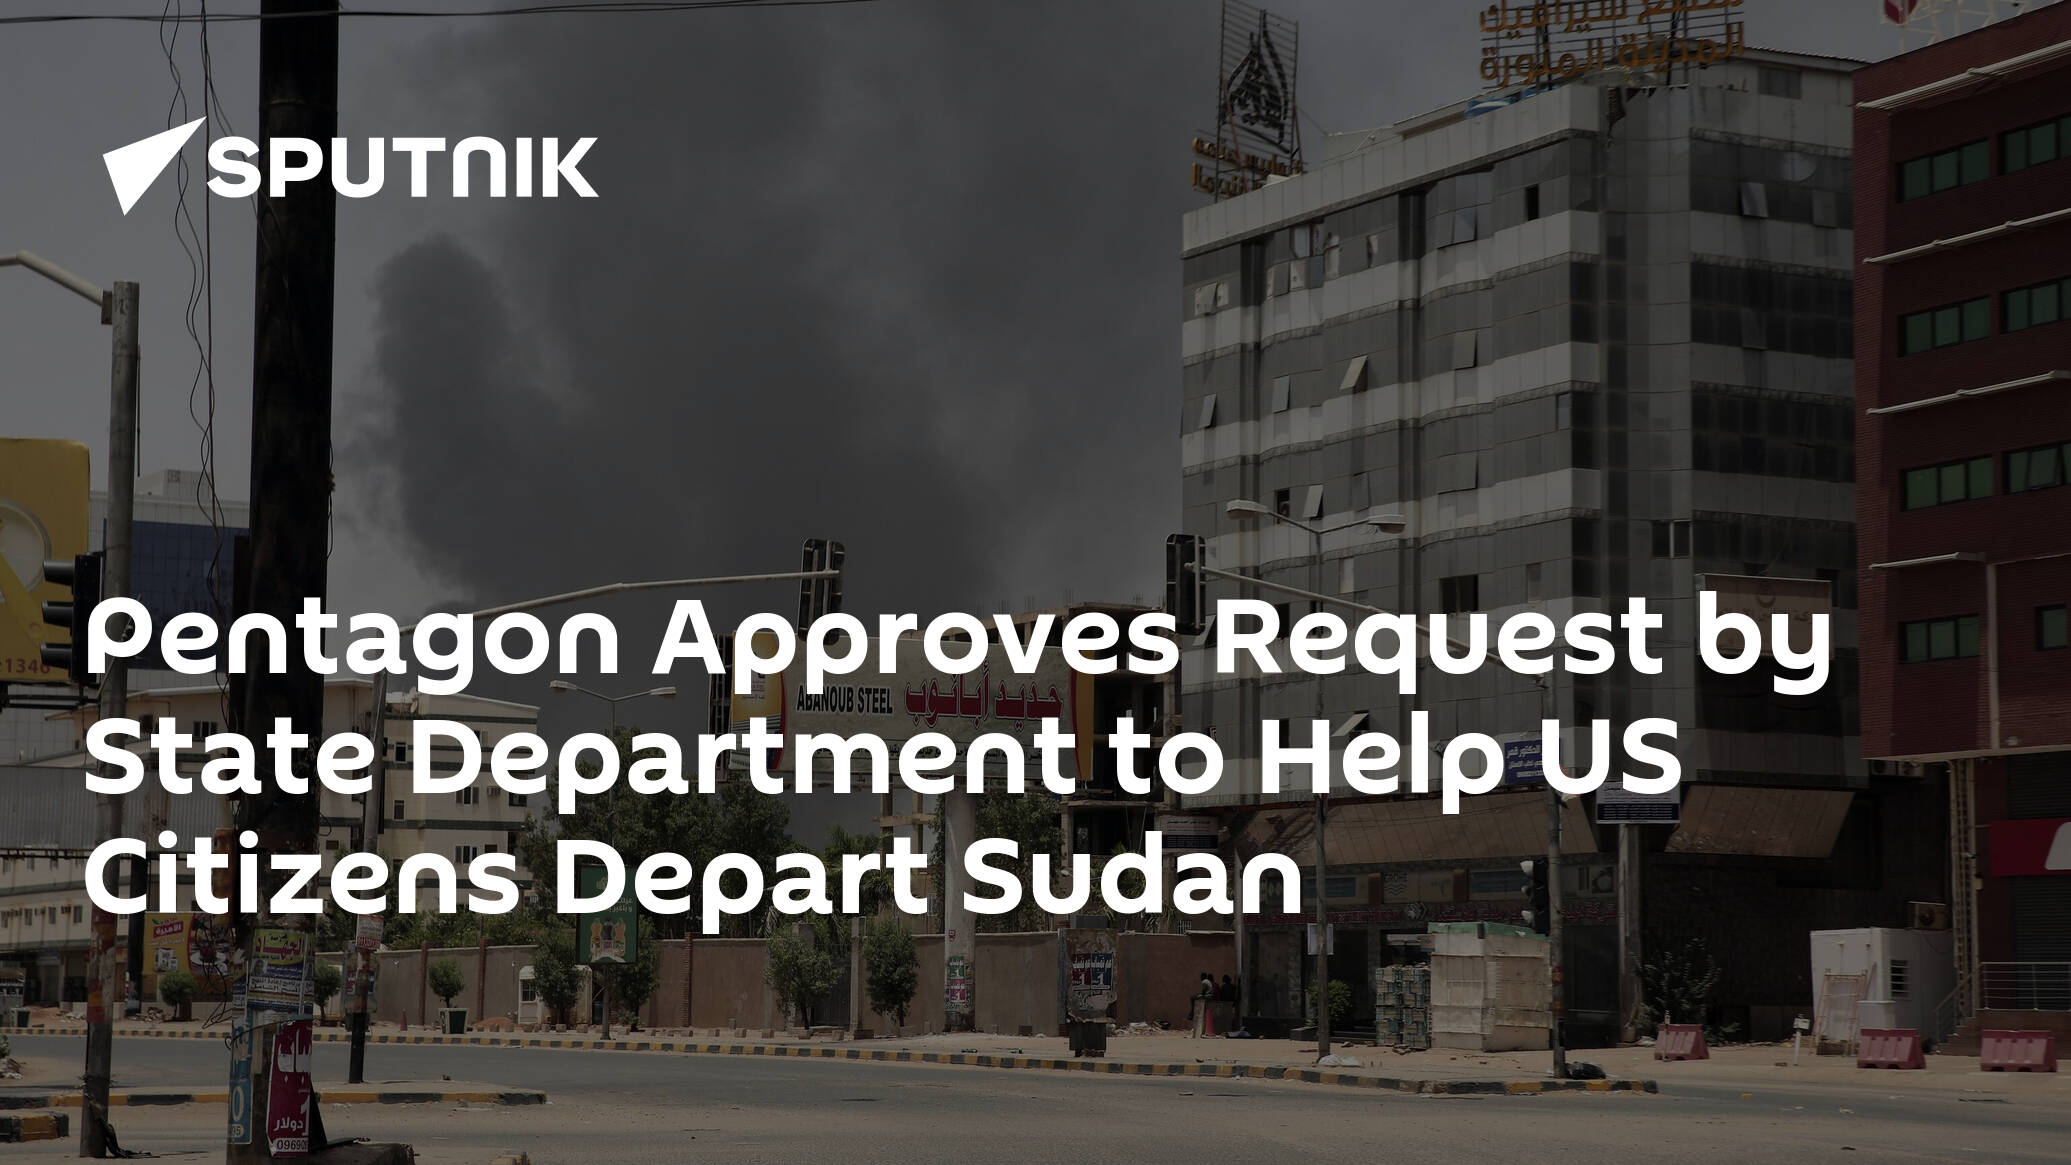 Pentagon Approves Request by State Department to Help US Citizens Depart Sudan